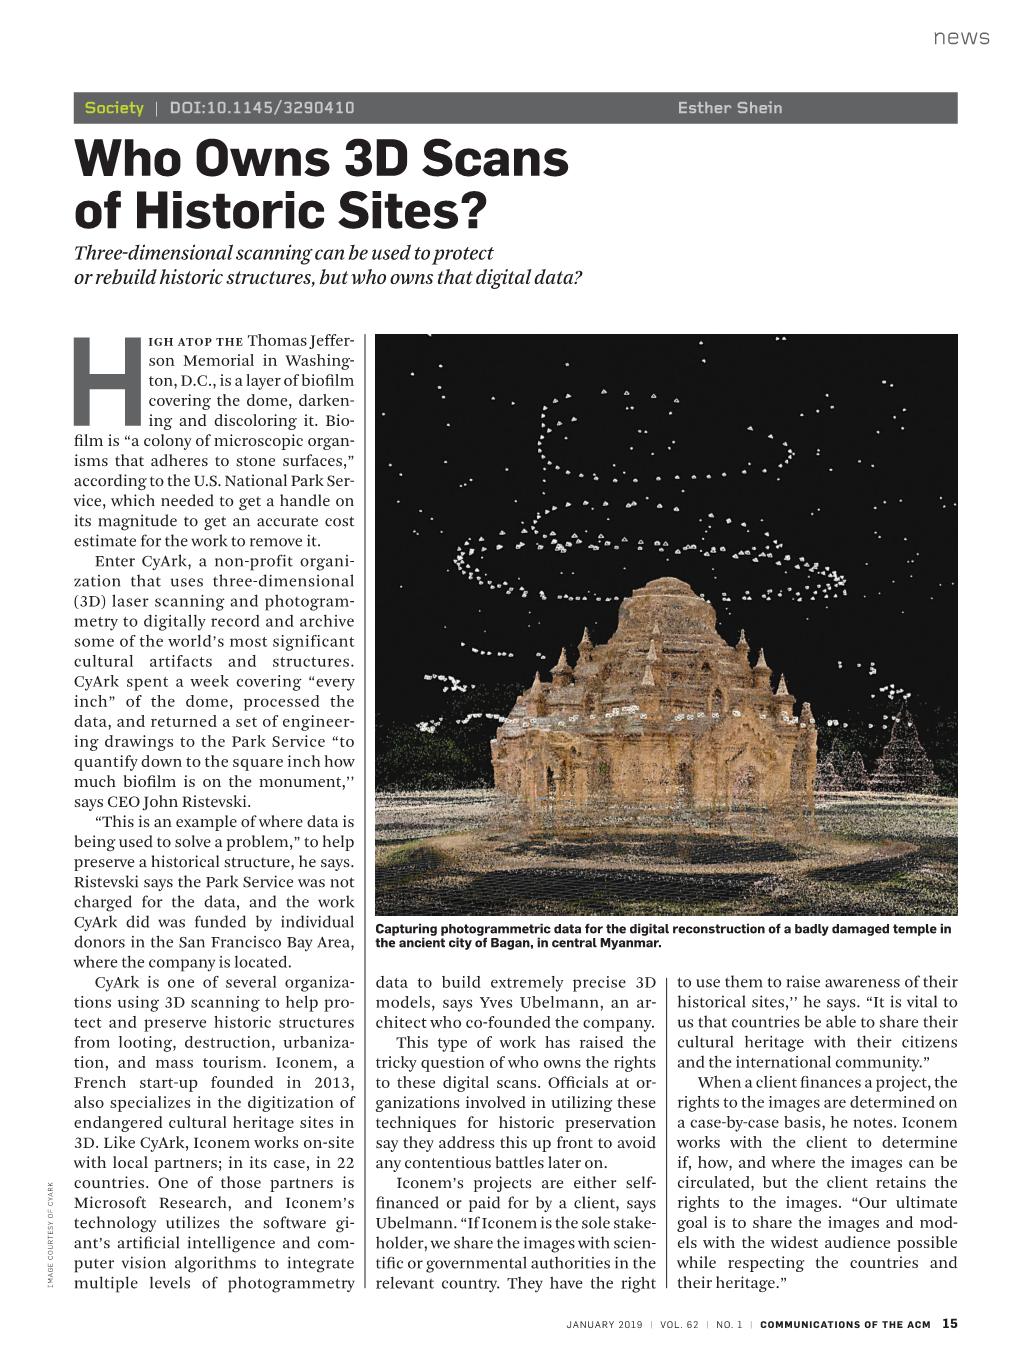 Who Owns 3D Scans of Historic Sites? Three-Dimensional Scanning Can Be Used to Protect Or Rebuild Historic Structures, but Who Owns That Digital Data?